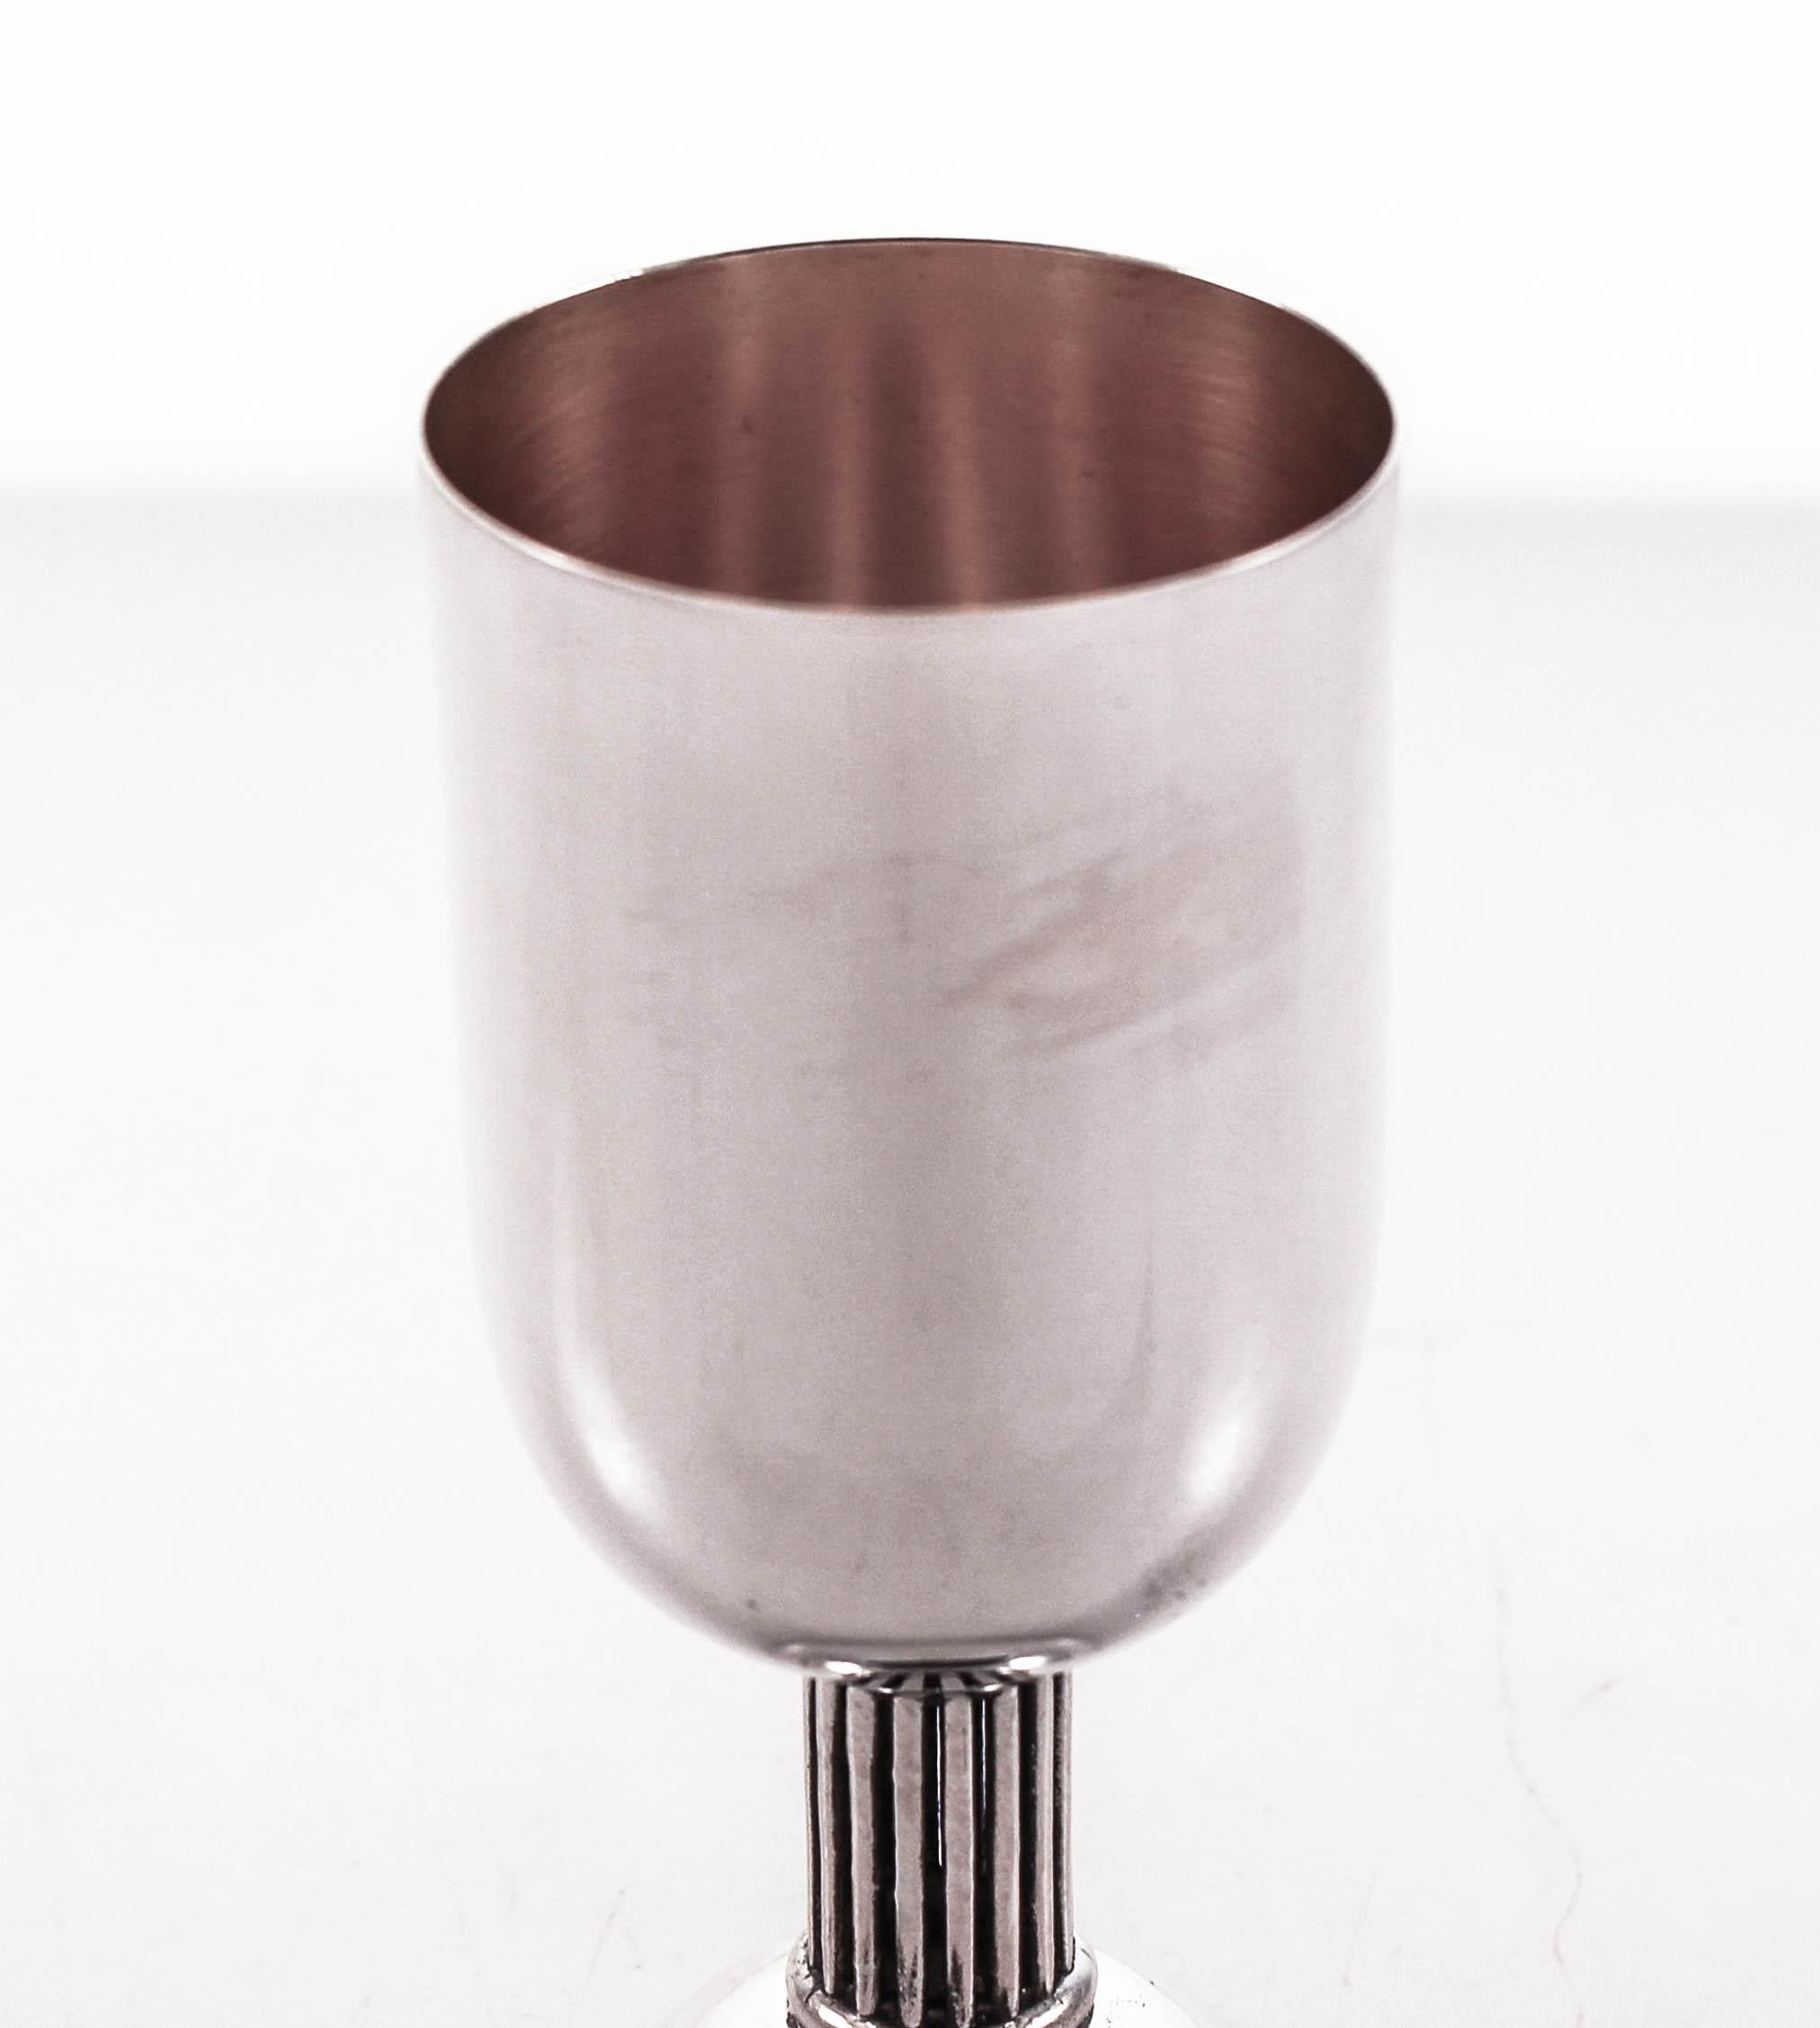 We are delighted to offer this sterling silver wine cup (Kiddush). It has a modern look and the stem is a colonnade. With straight lines and a light-feel, unlike the gaudy heavy designs you normally find in a goblet.